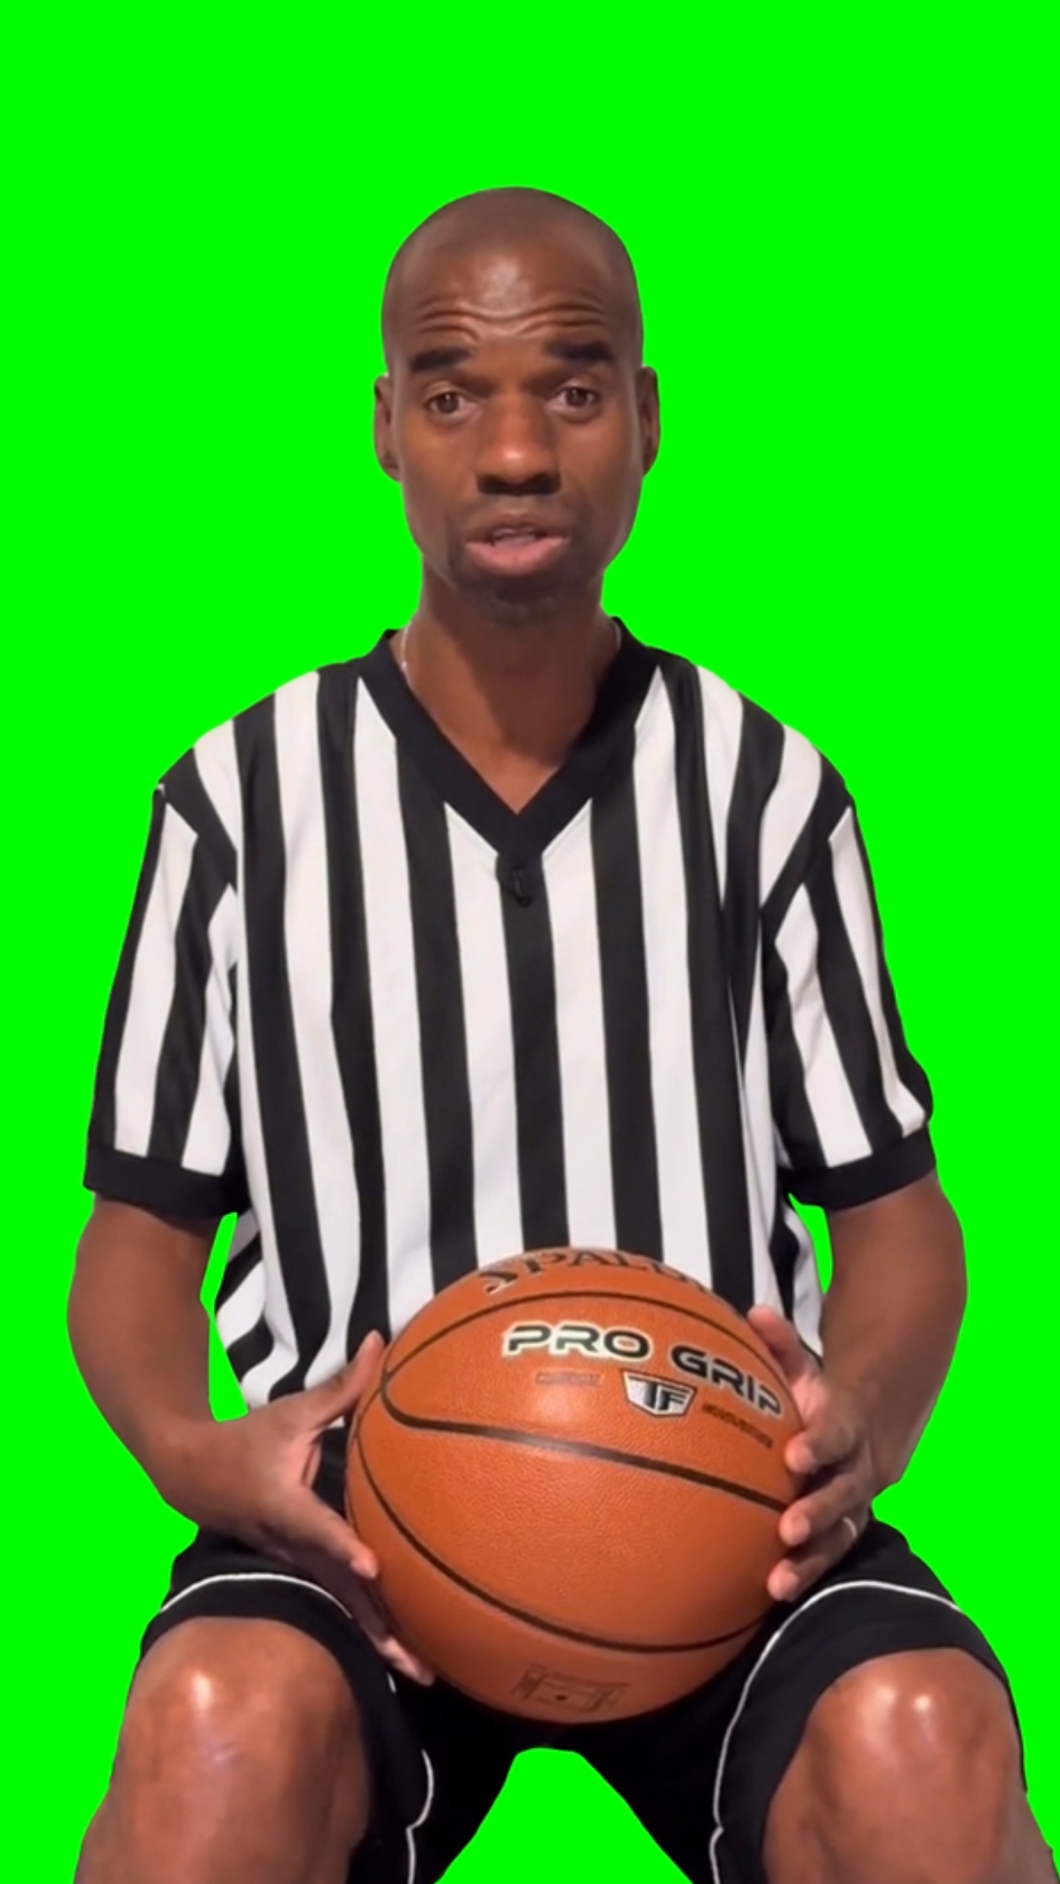 Omar The Referee Is Alive Basketball Catching Referee Green Screen Creatorset